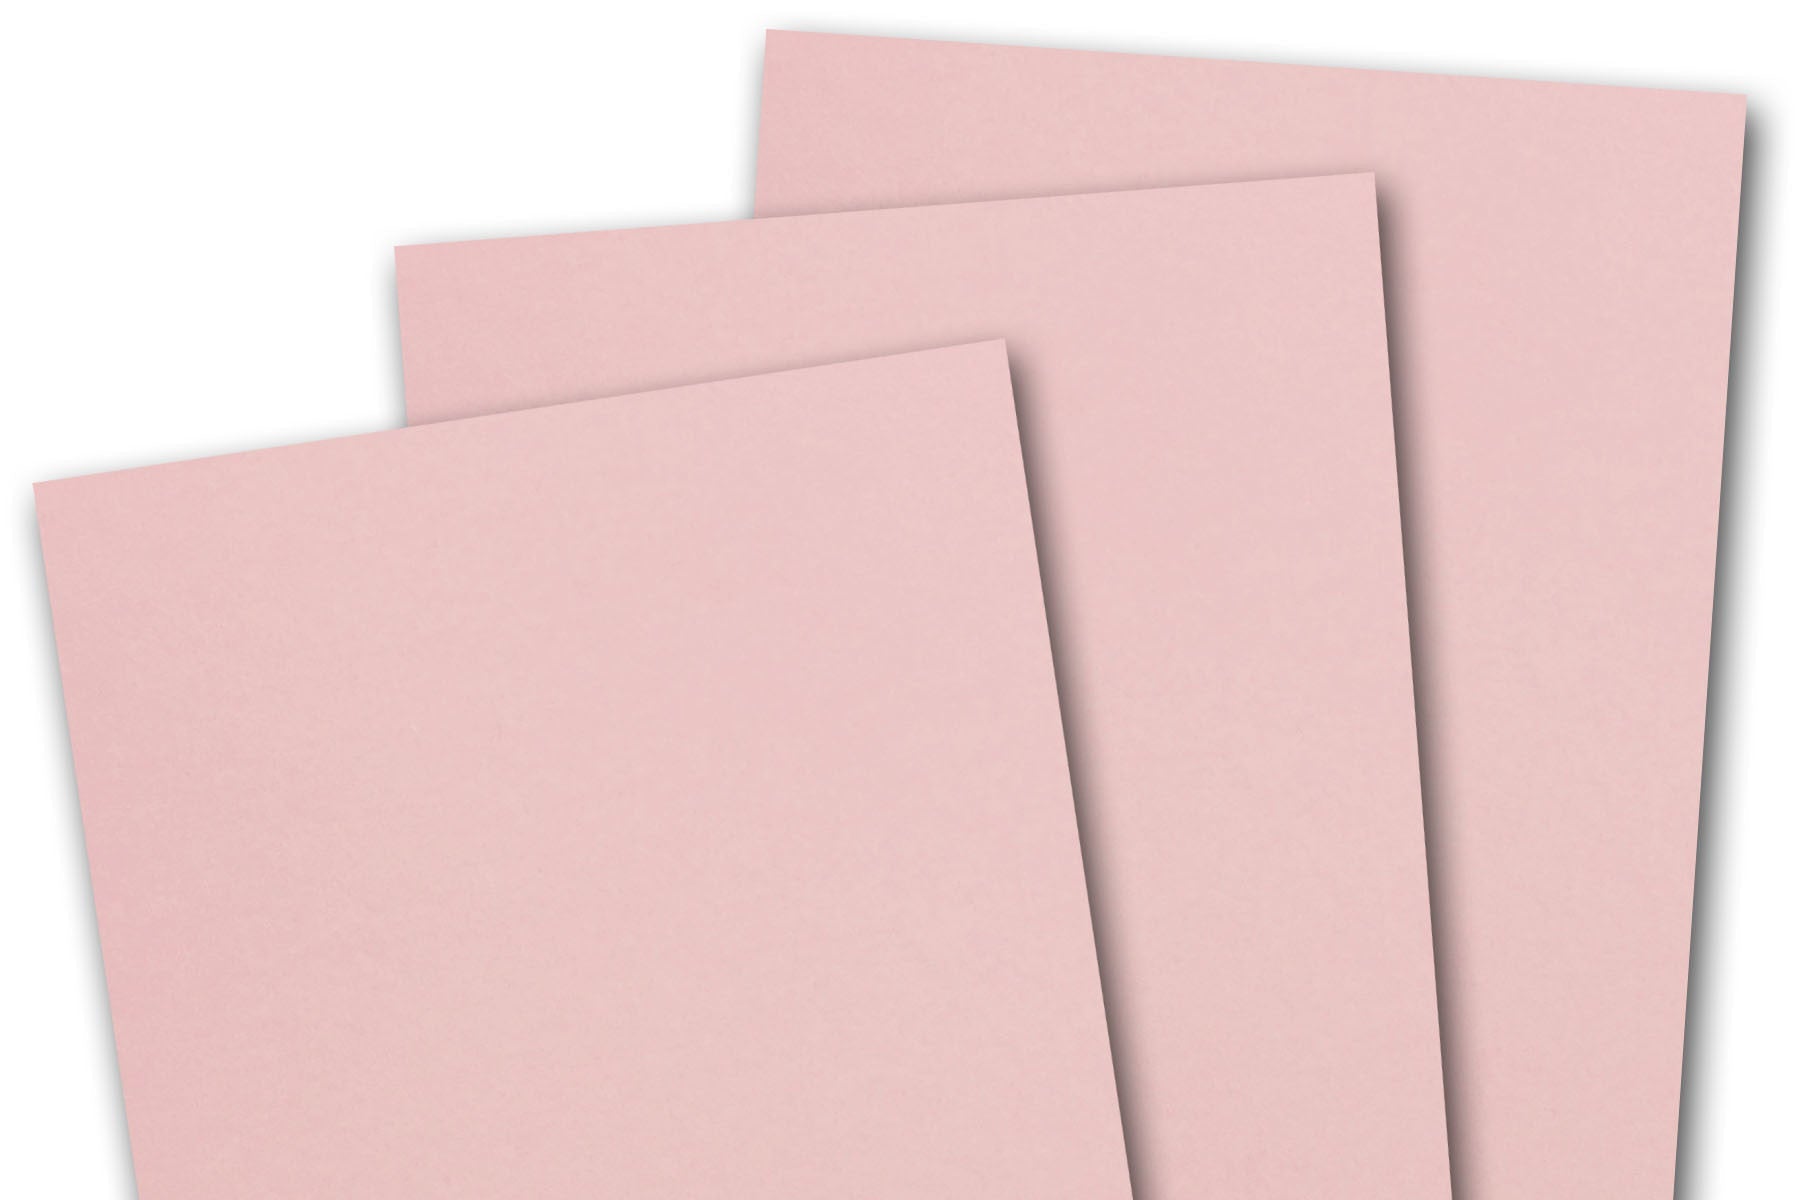 Premium Color Card Stock Paper, Size: 8.5 x 11, Pink